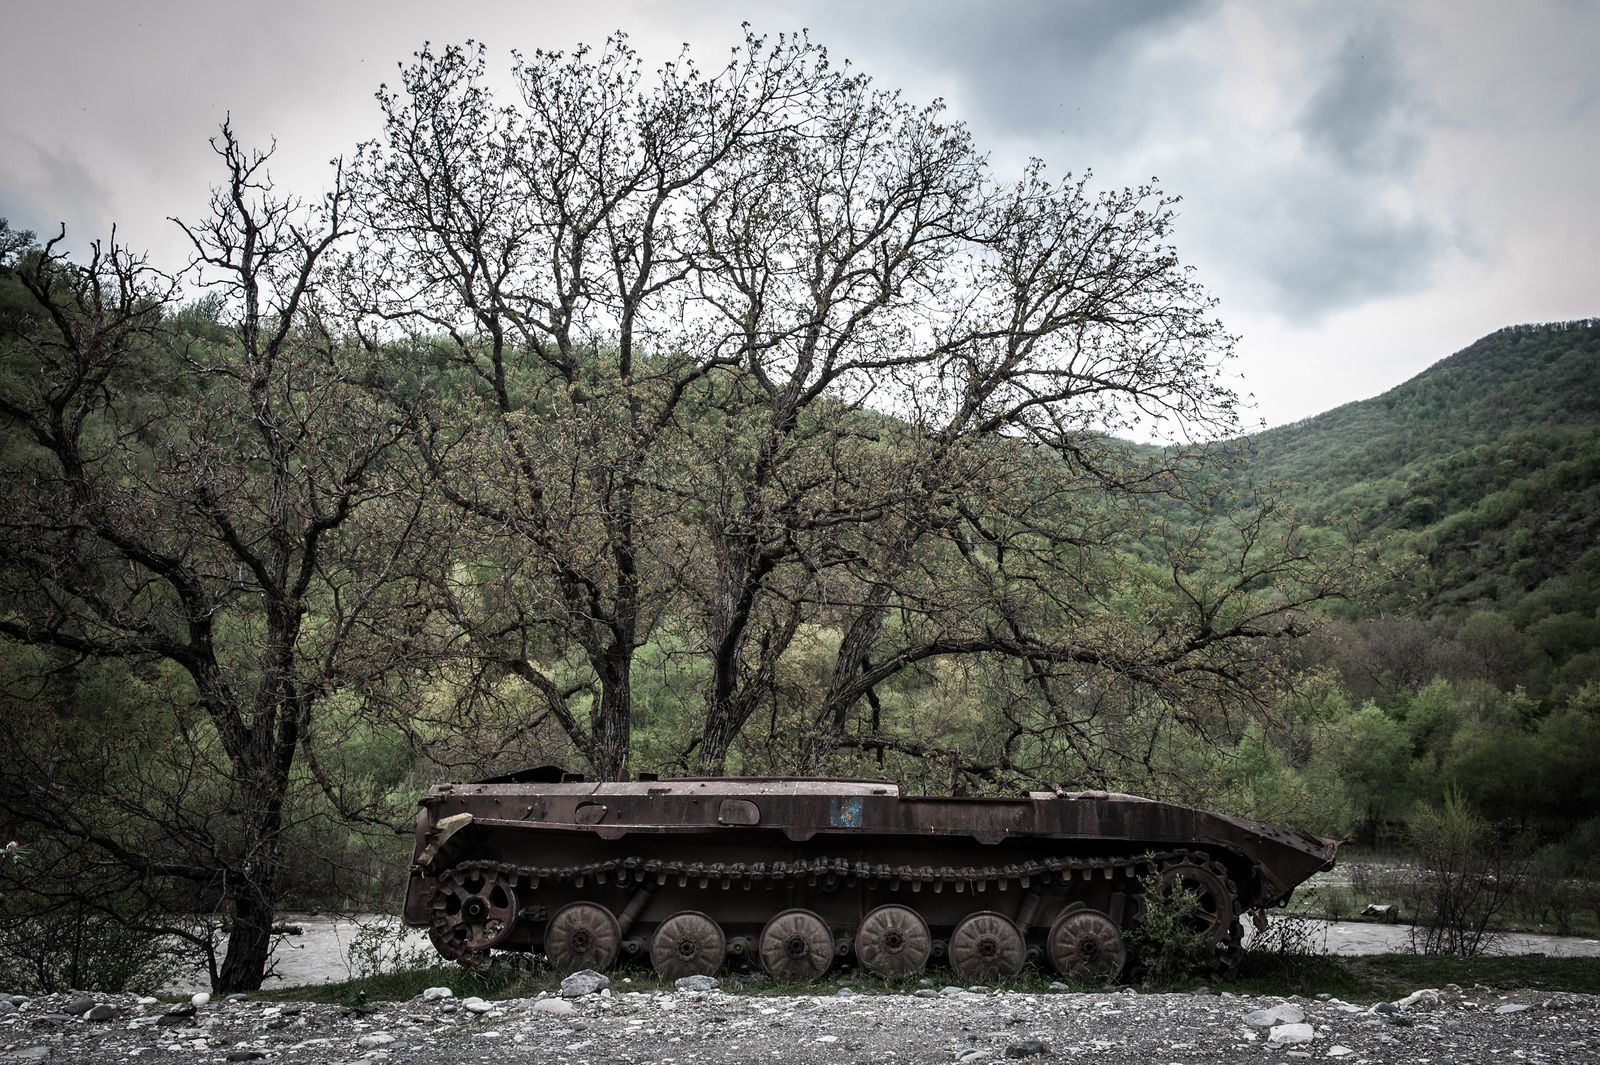 © Mattia Vacca - A tank destroyed in the 1993 conflict near the northern border of Nagorno-Karabakh. Two soldiers were killed in this attack.